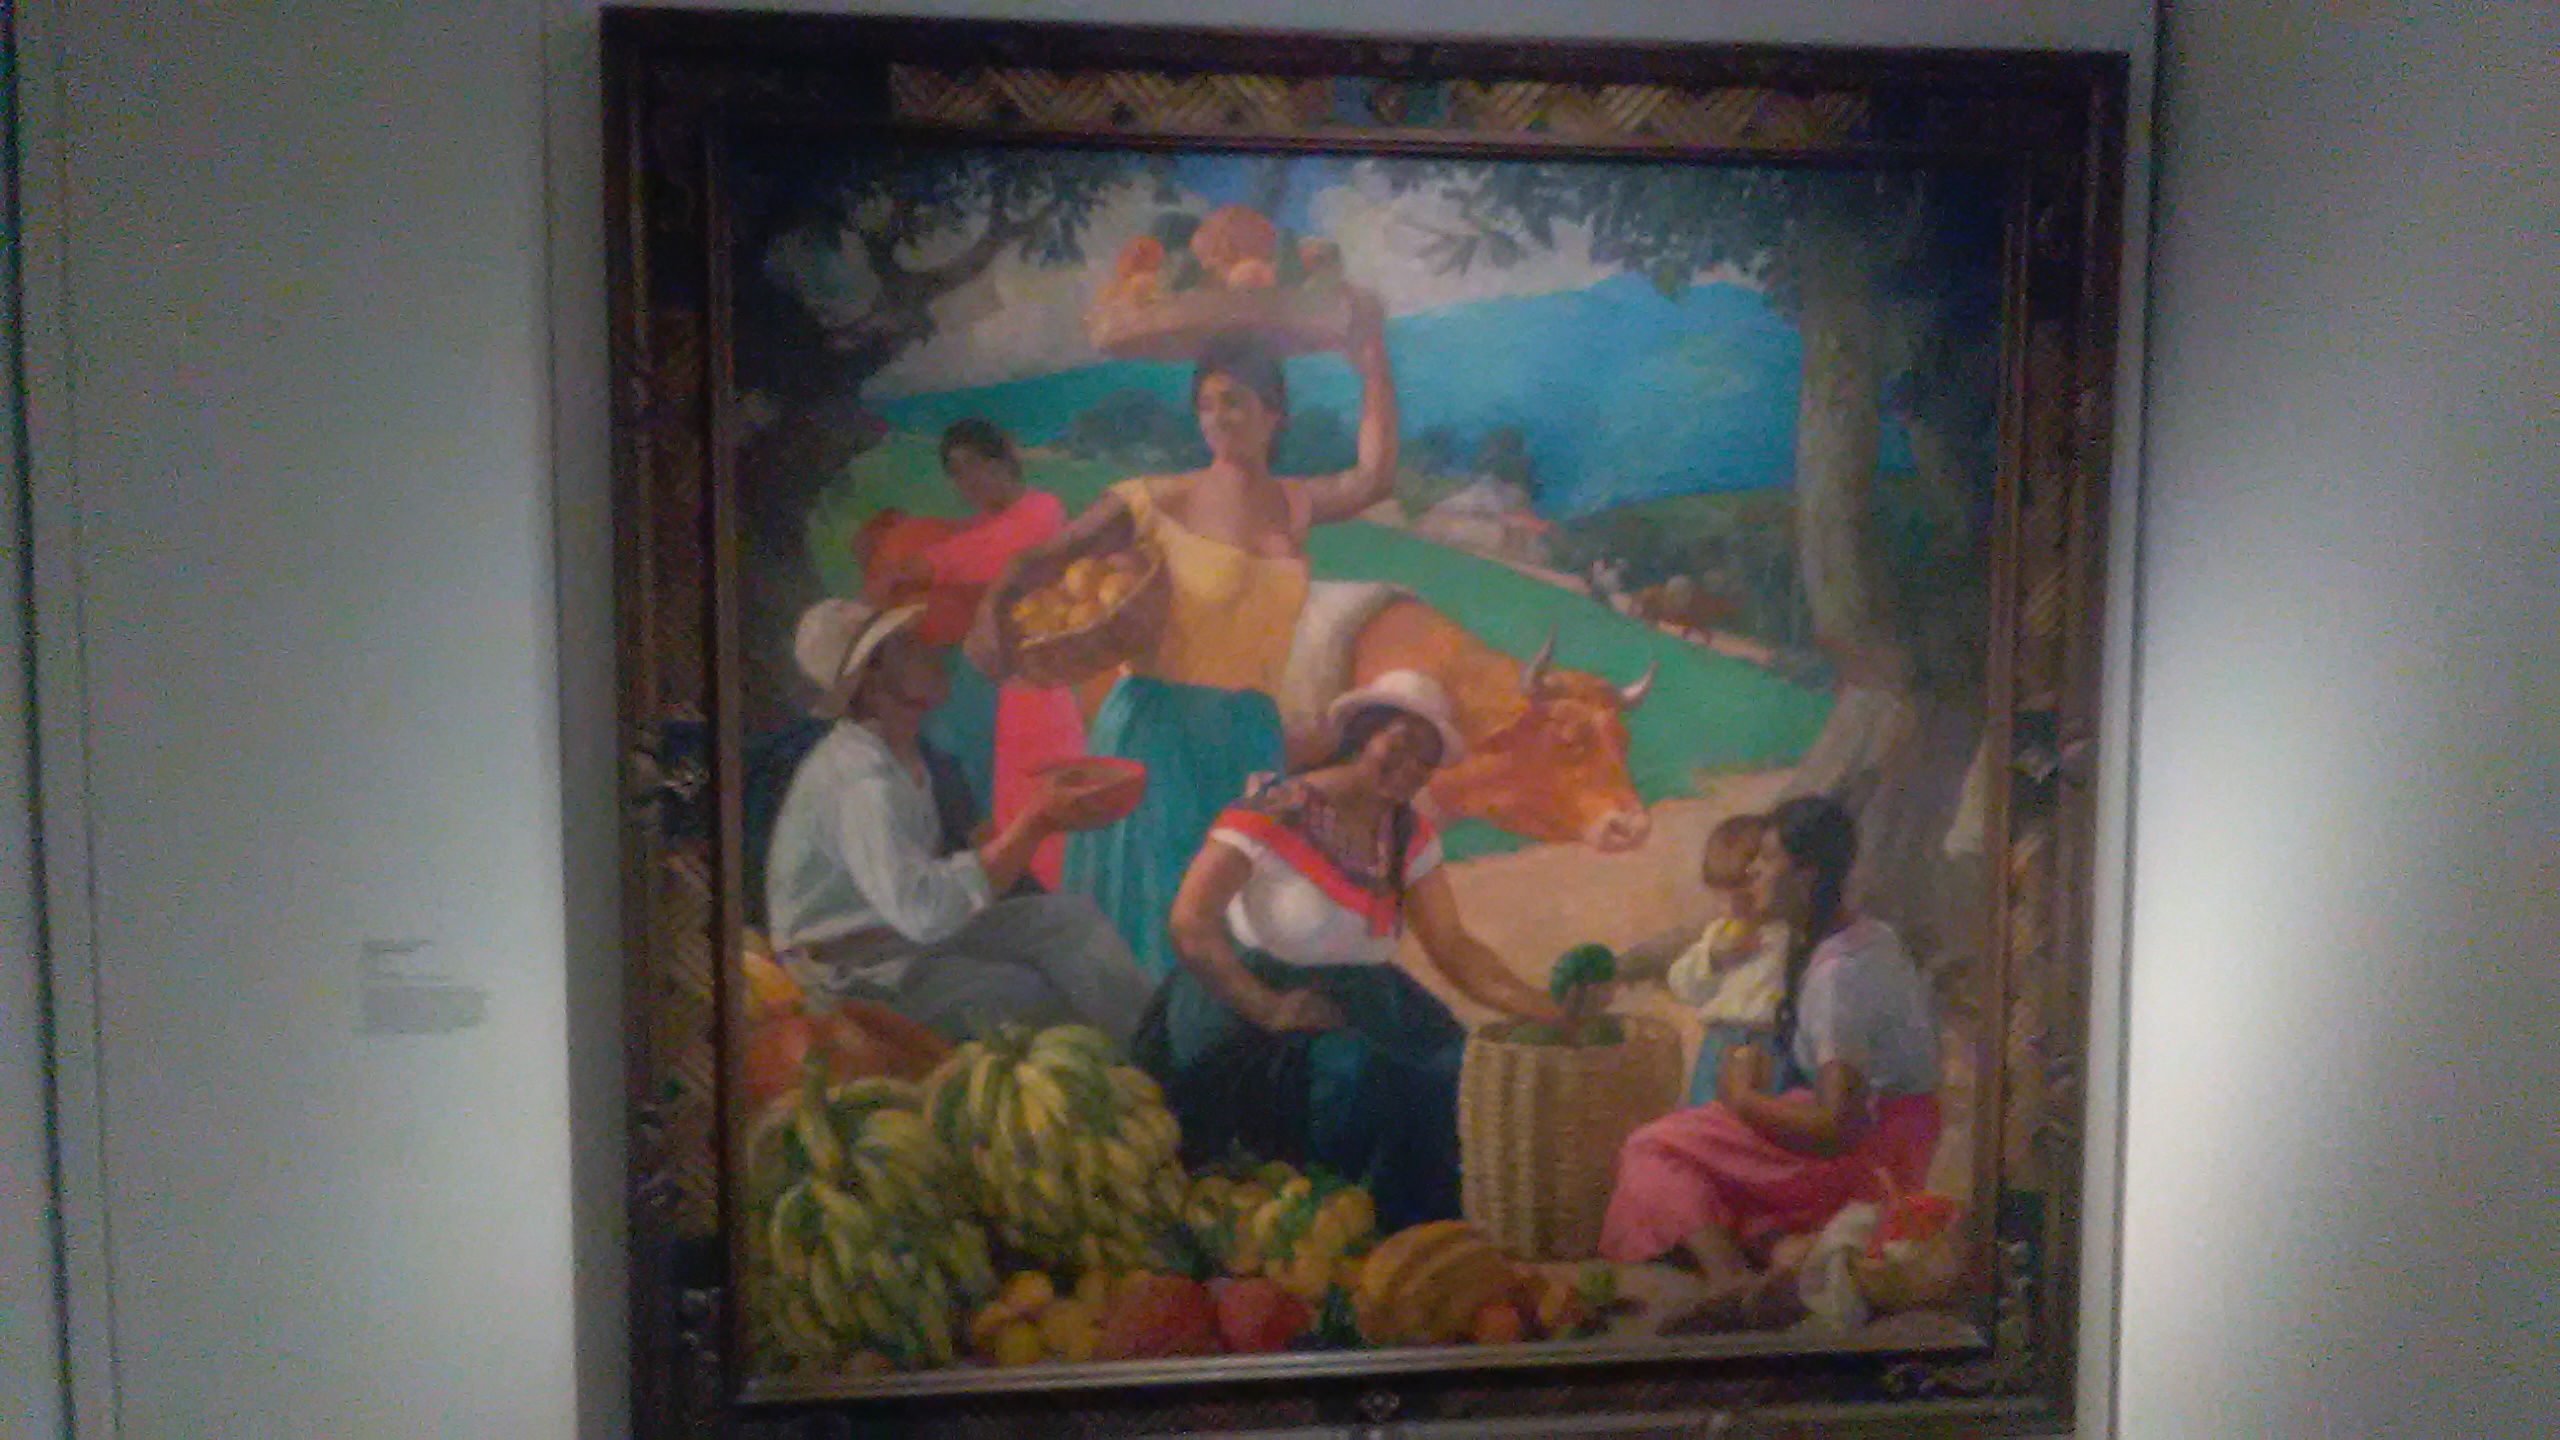 Painting in Bogotá's Museo Nacional